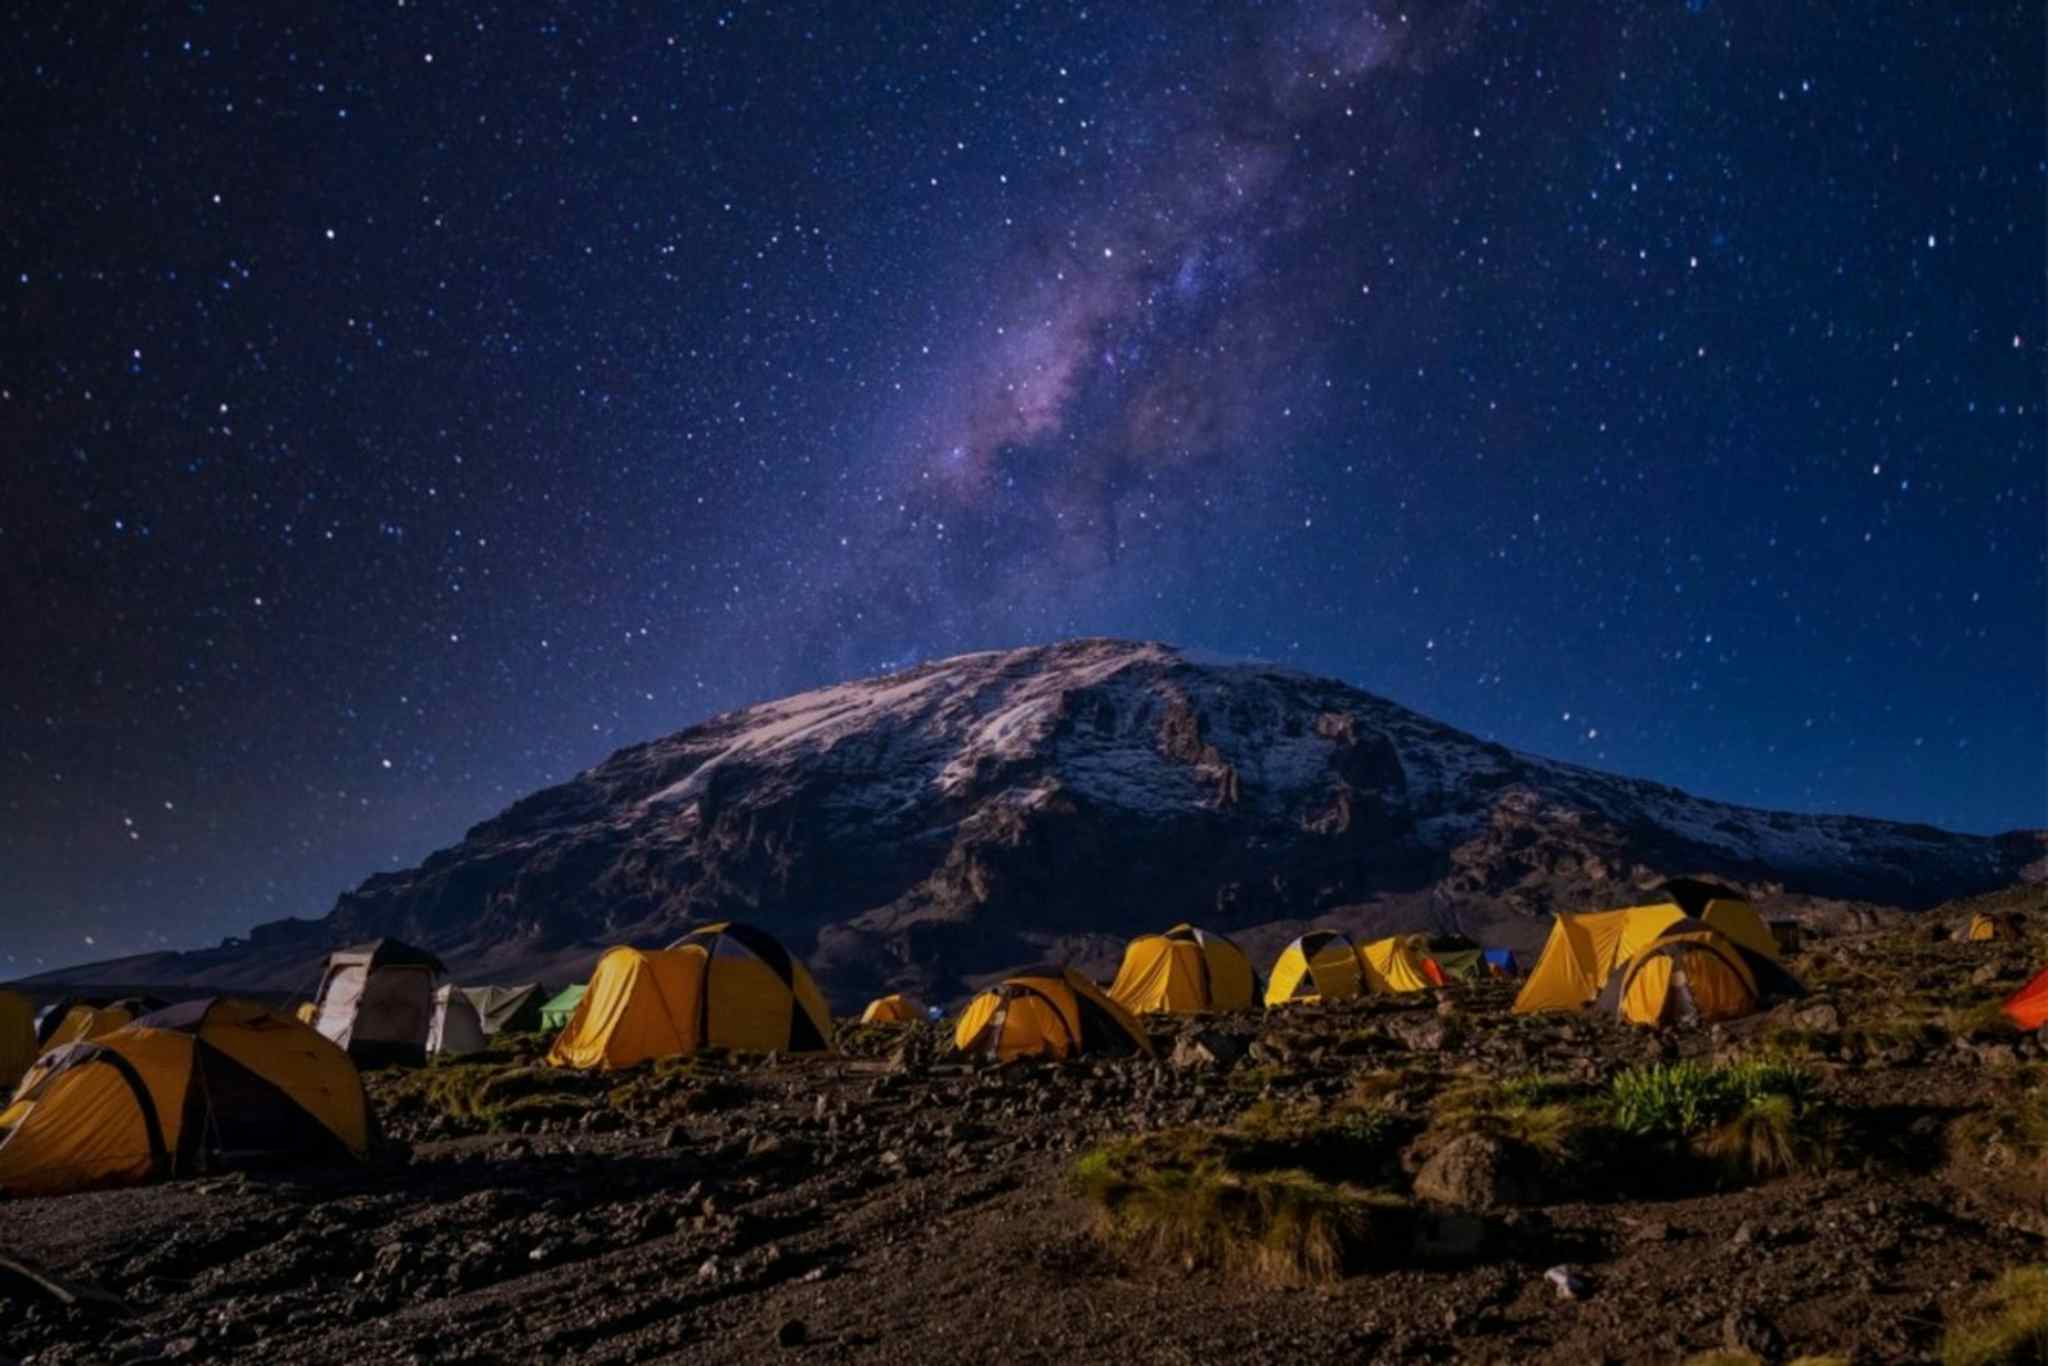 A group of 7 yellow tents in front of the summit of Kilimanjaro, Tanzania under a clear and starry sky.